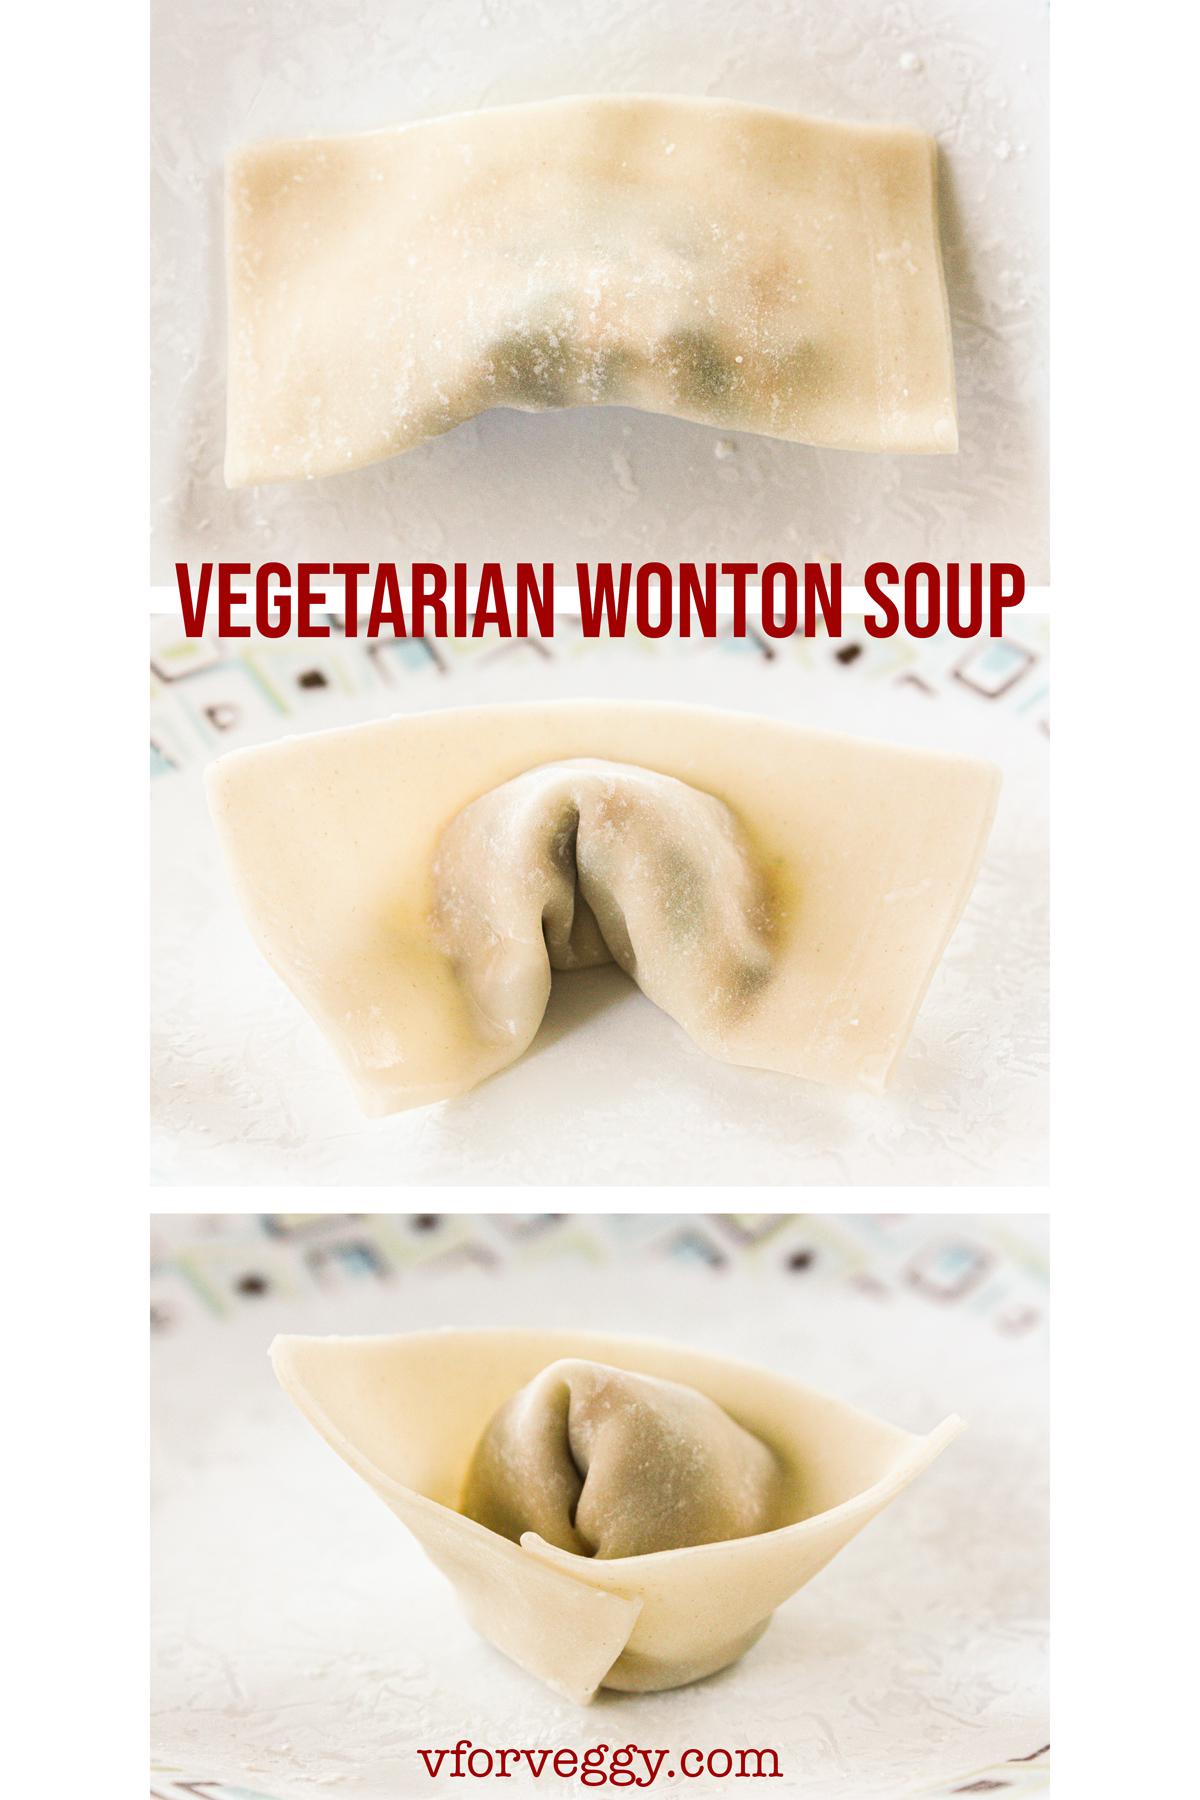 Step-by-step Guide To Wrapping Wonton